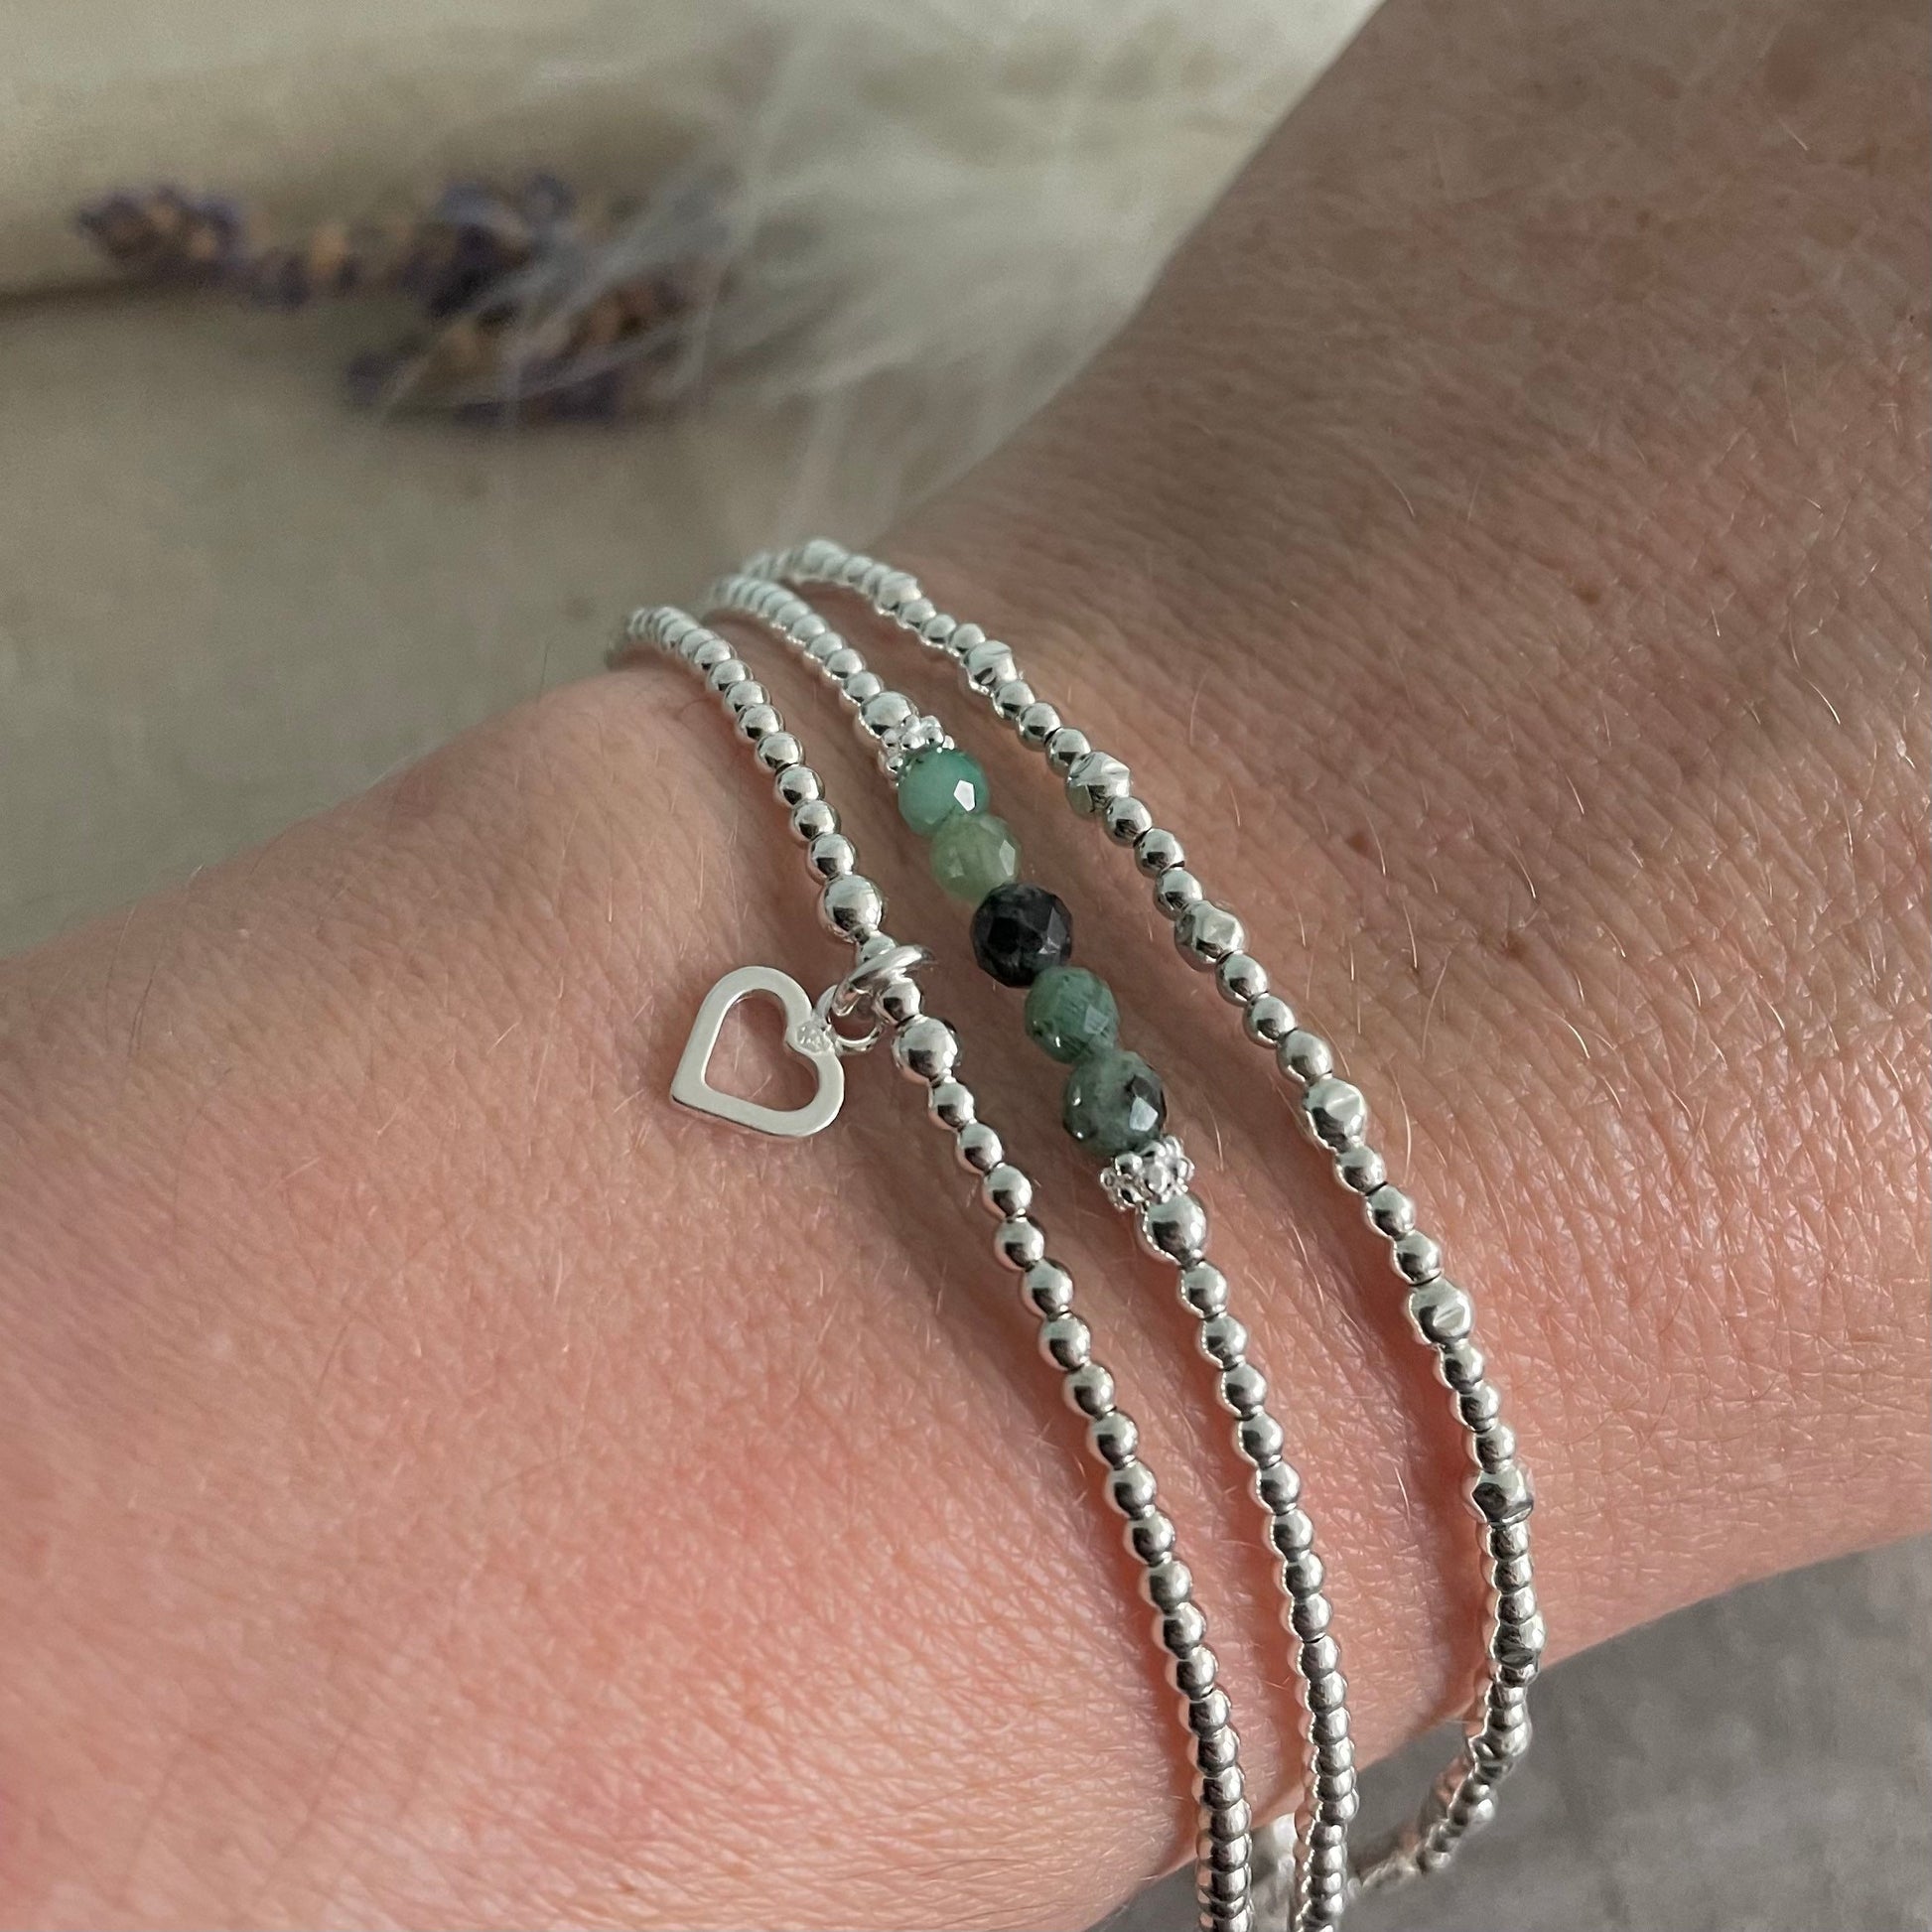 A Dainty May Birthstone Emerald Bracelet Set, May Stacking Bracelets for Women in Sterling Silver